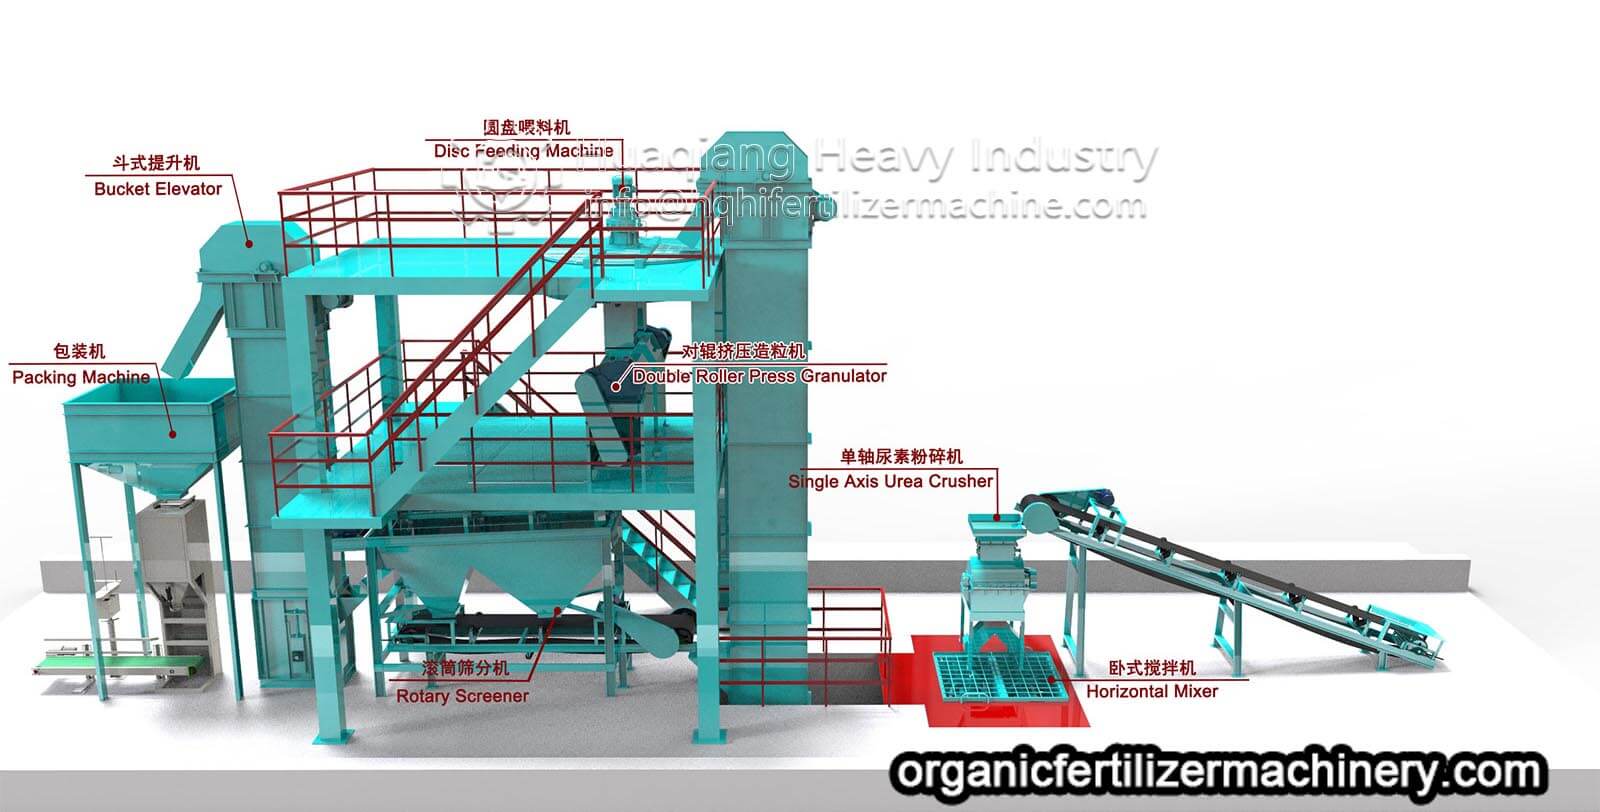 Production method and process of compound fertilizer dry powder on double roller granulator